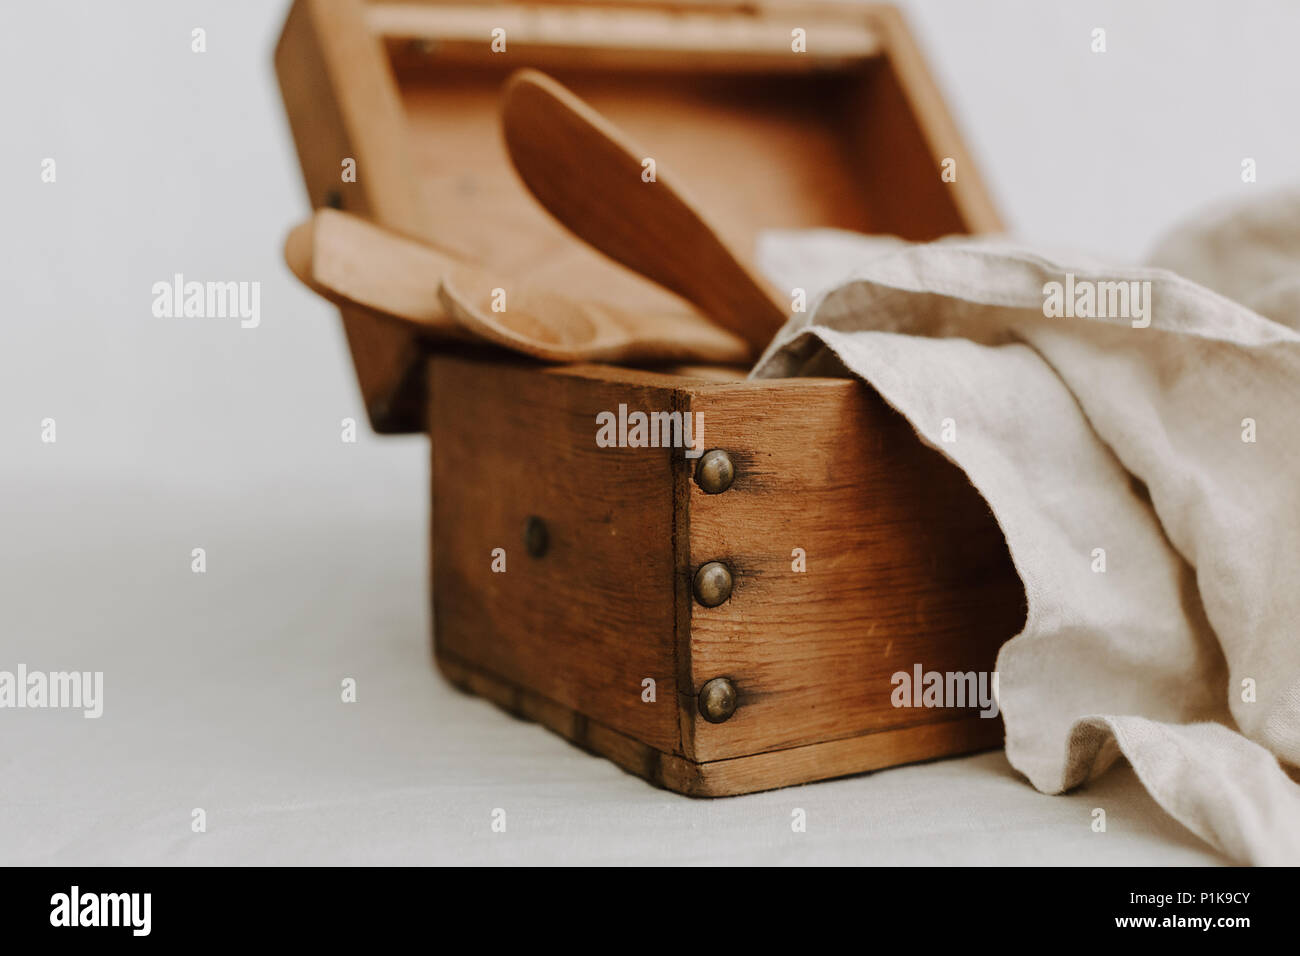 Wooden box with kitchen utensils and a linen napkin Stock Photo